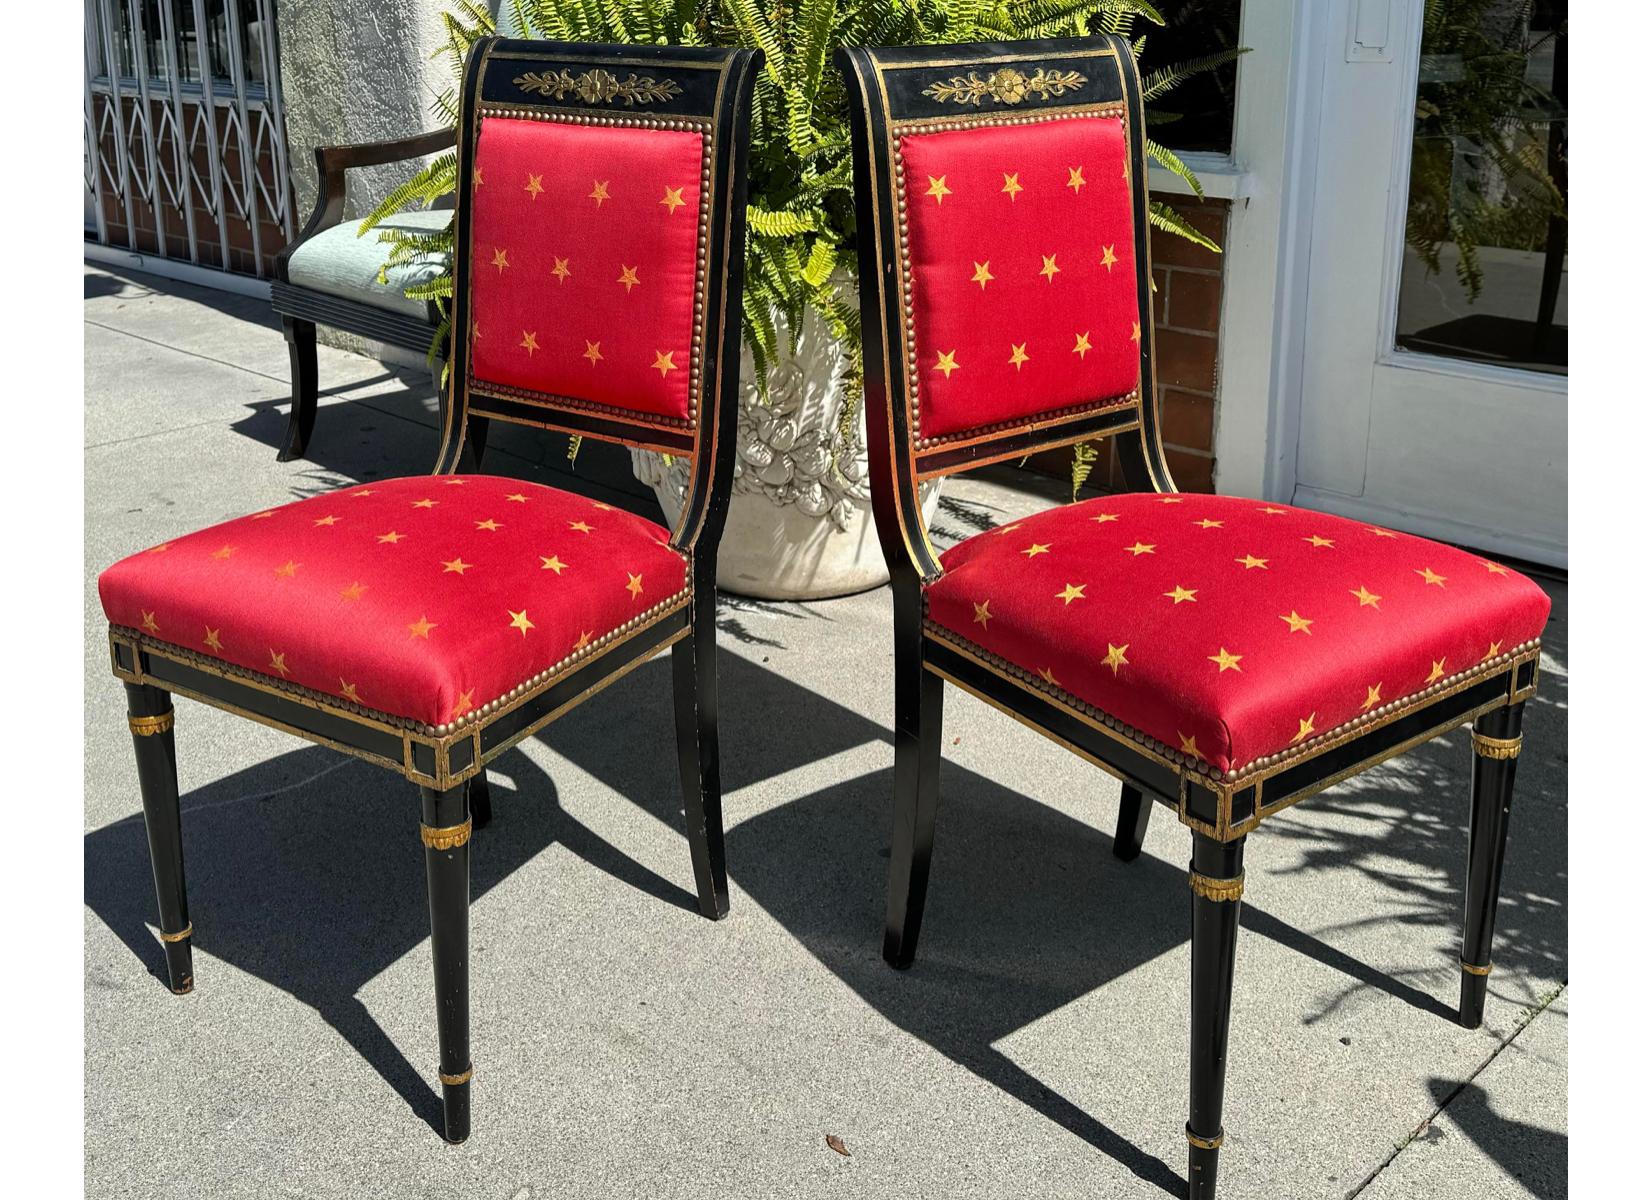 19th Century Pair of Antique Empire Black & Gold Chairs W Red Clarence House Seats For Sale